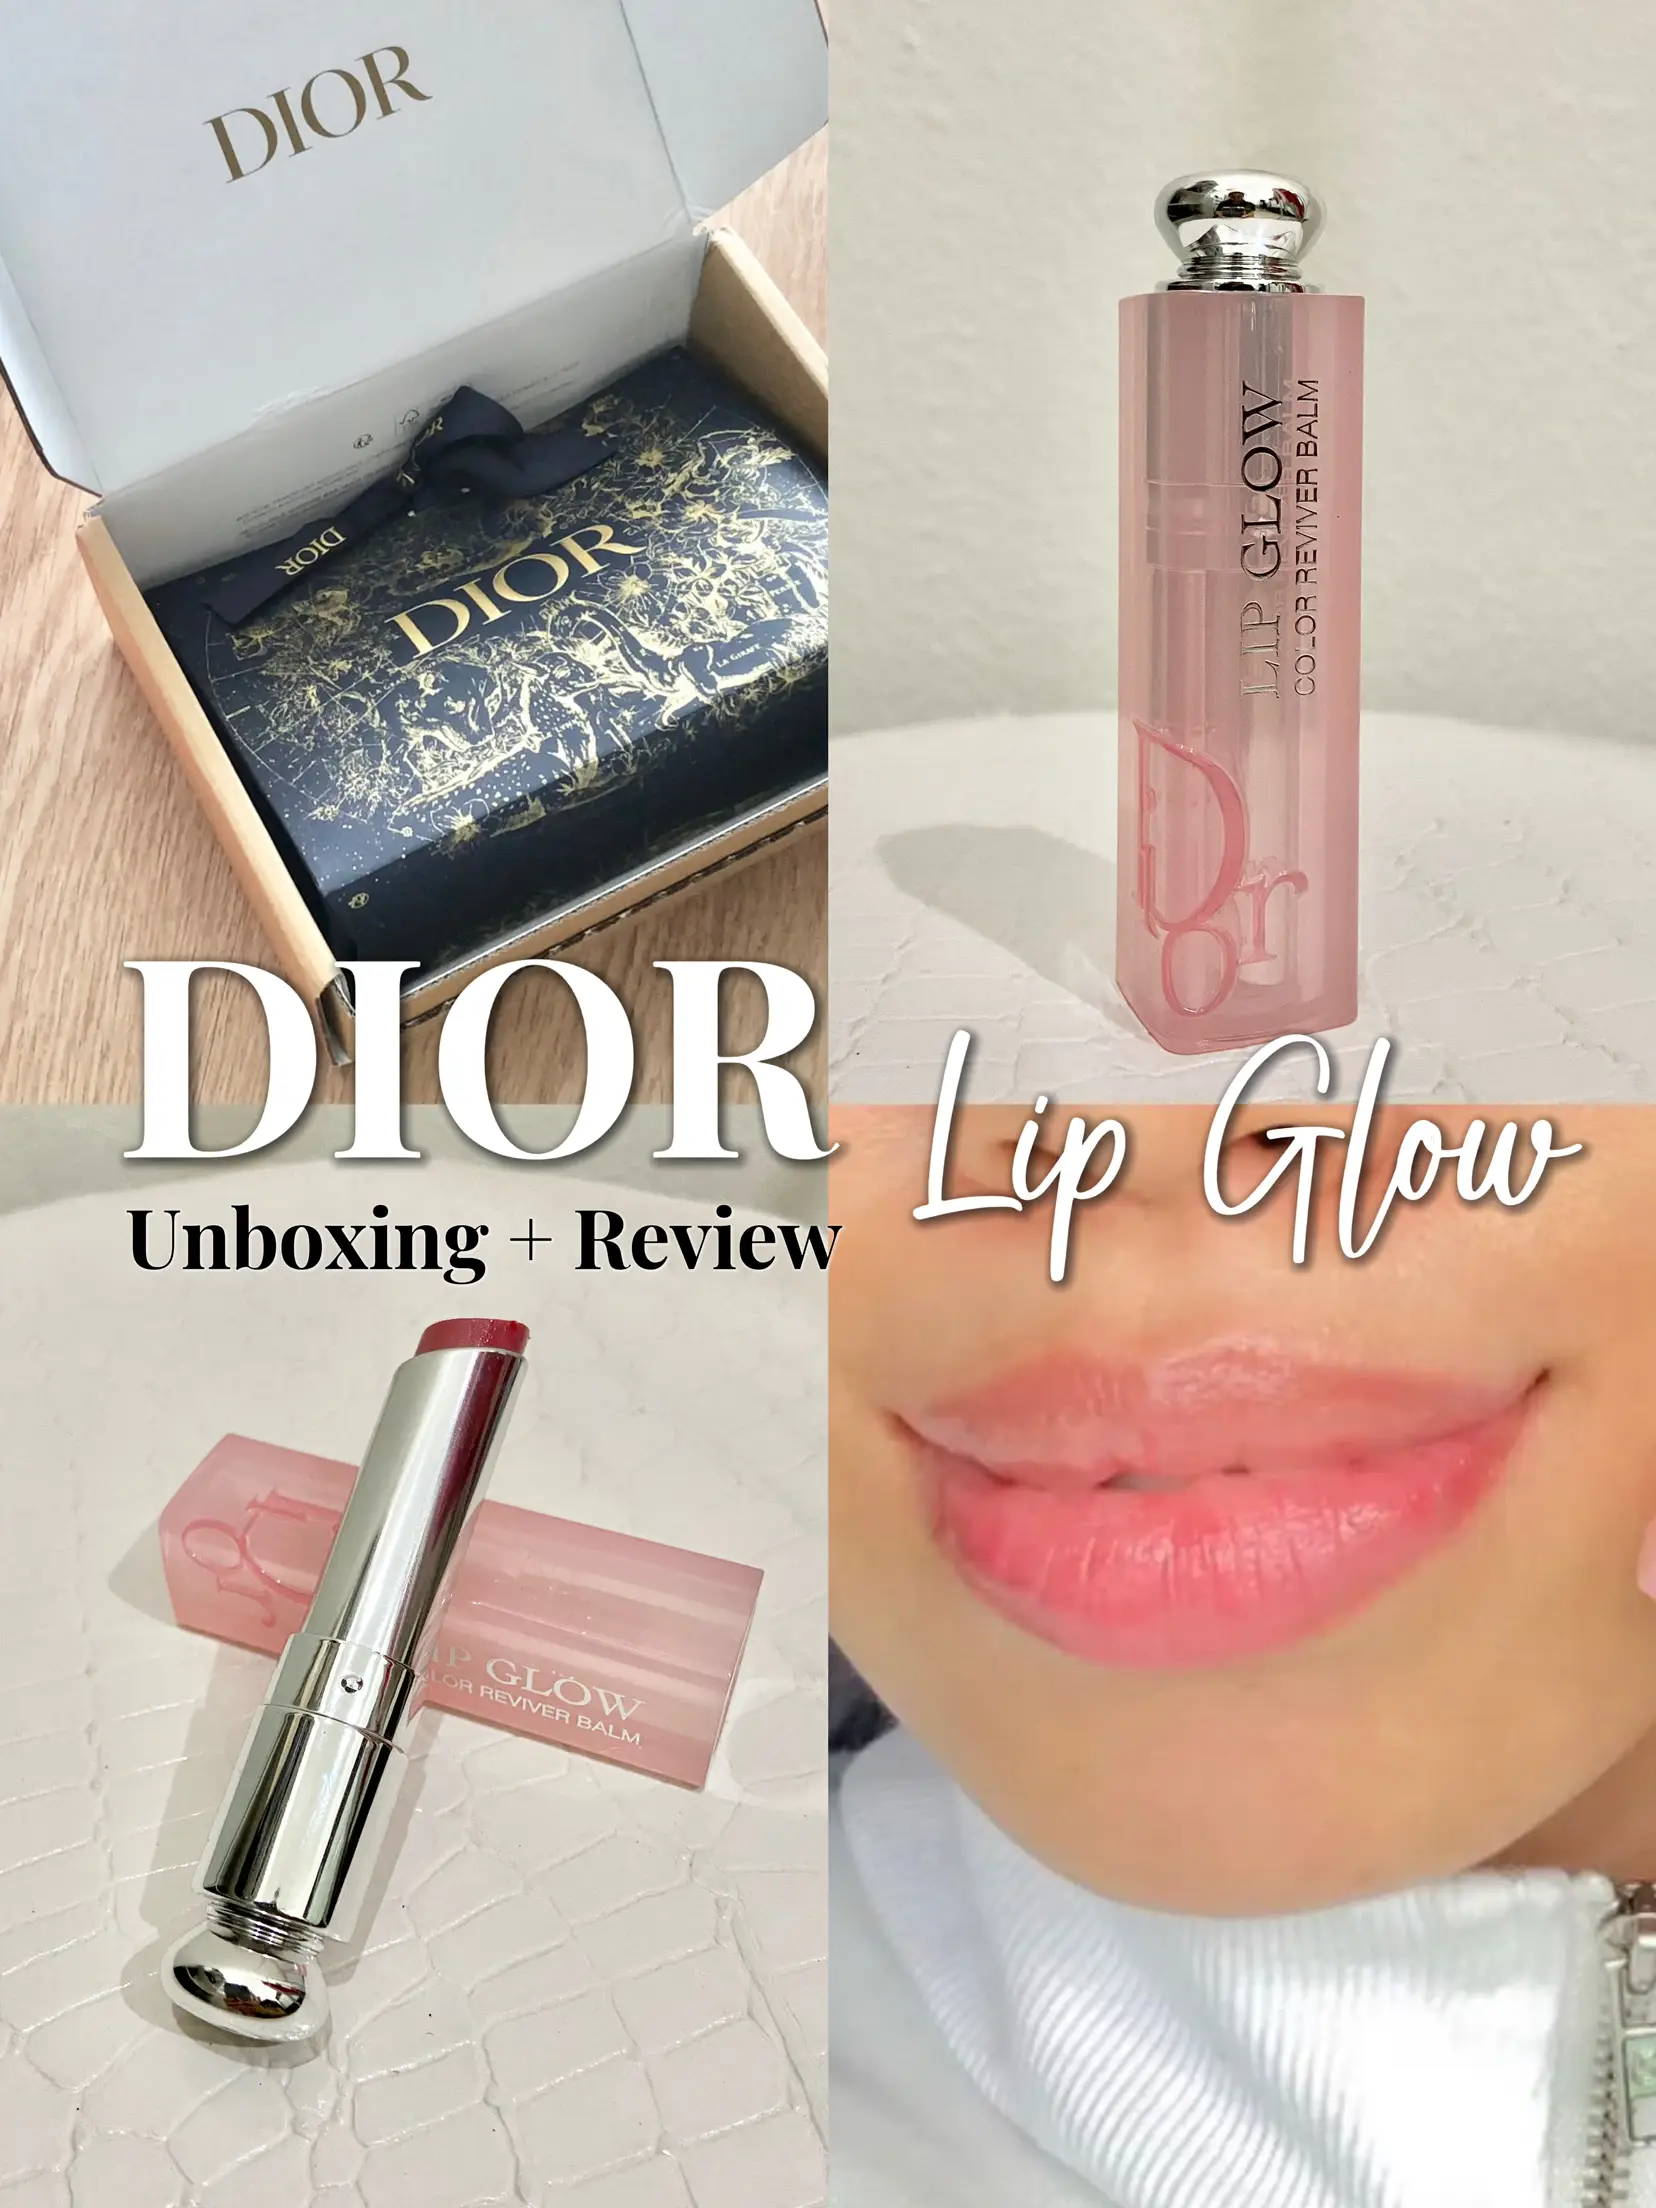 UNBOXING + REVIEW DIOR ADDICT LIP GLOW!, Video published by aliahjennie